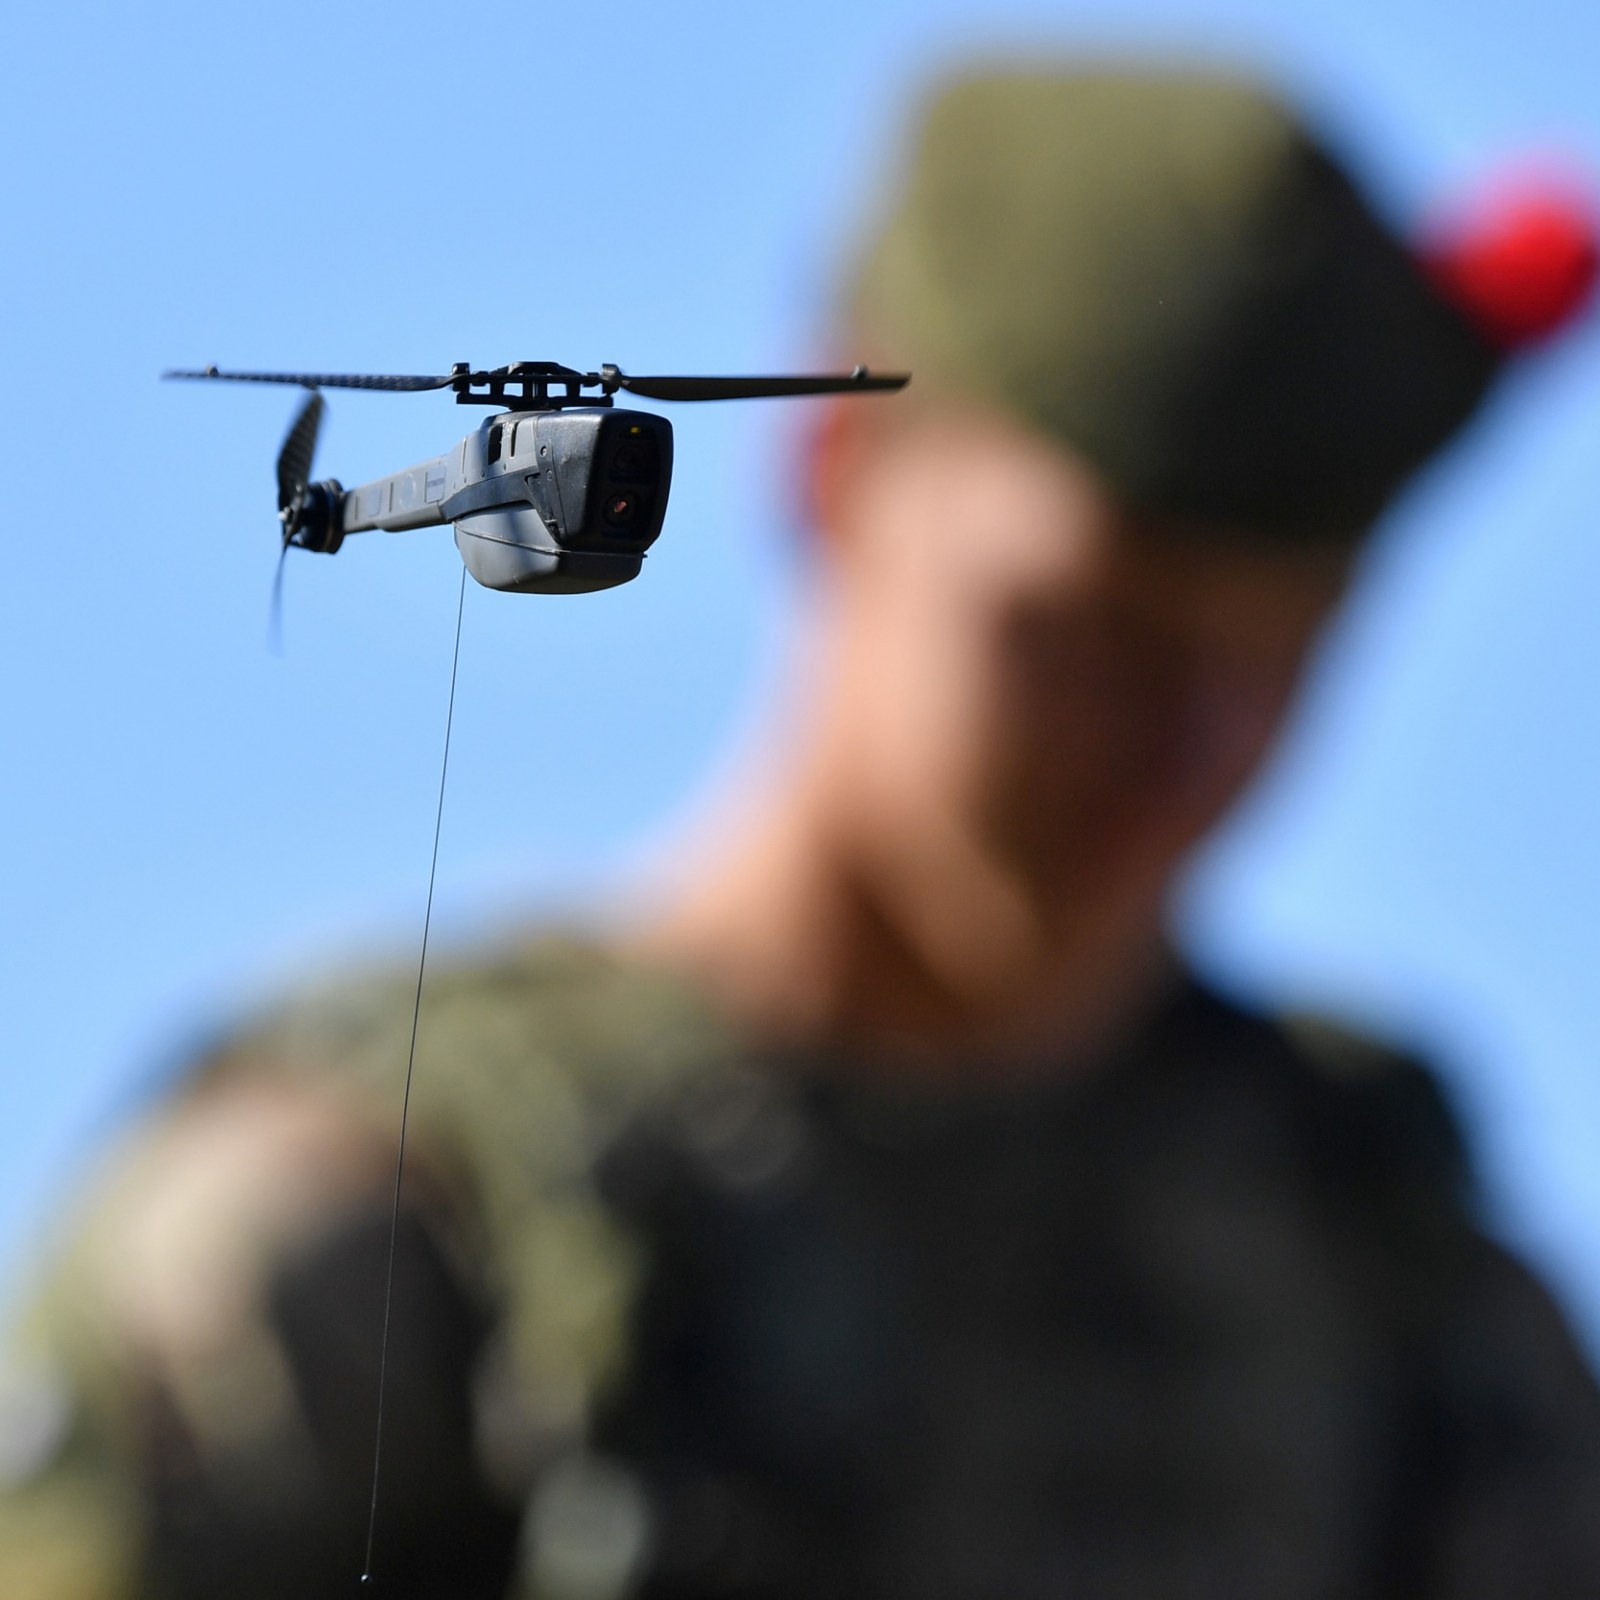 farligt fangst hvordan What Are Black Hornets? The Cutting-Edge Micro-Drones Donated to Ukraine